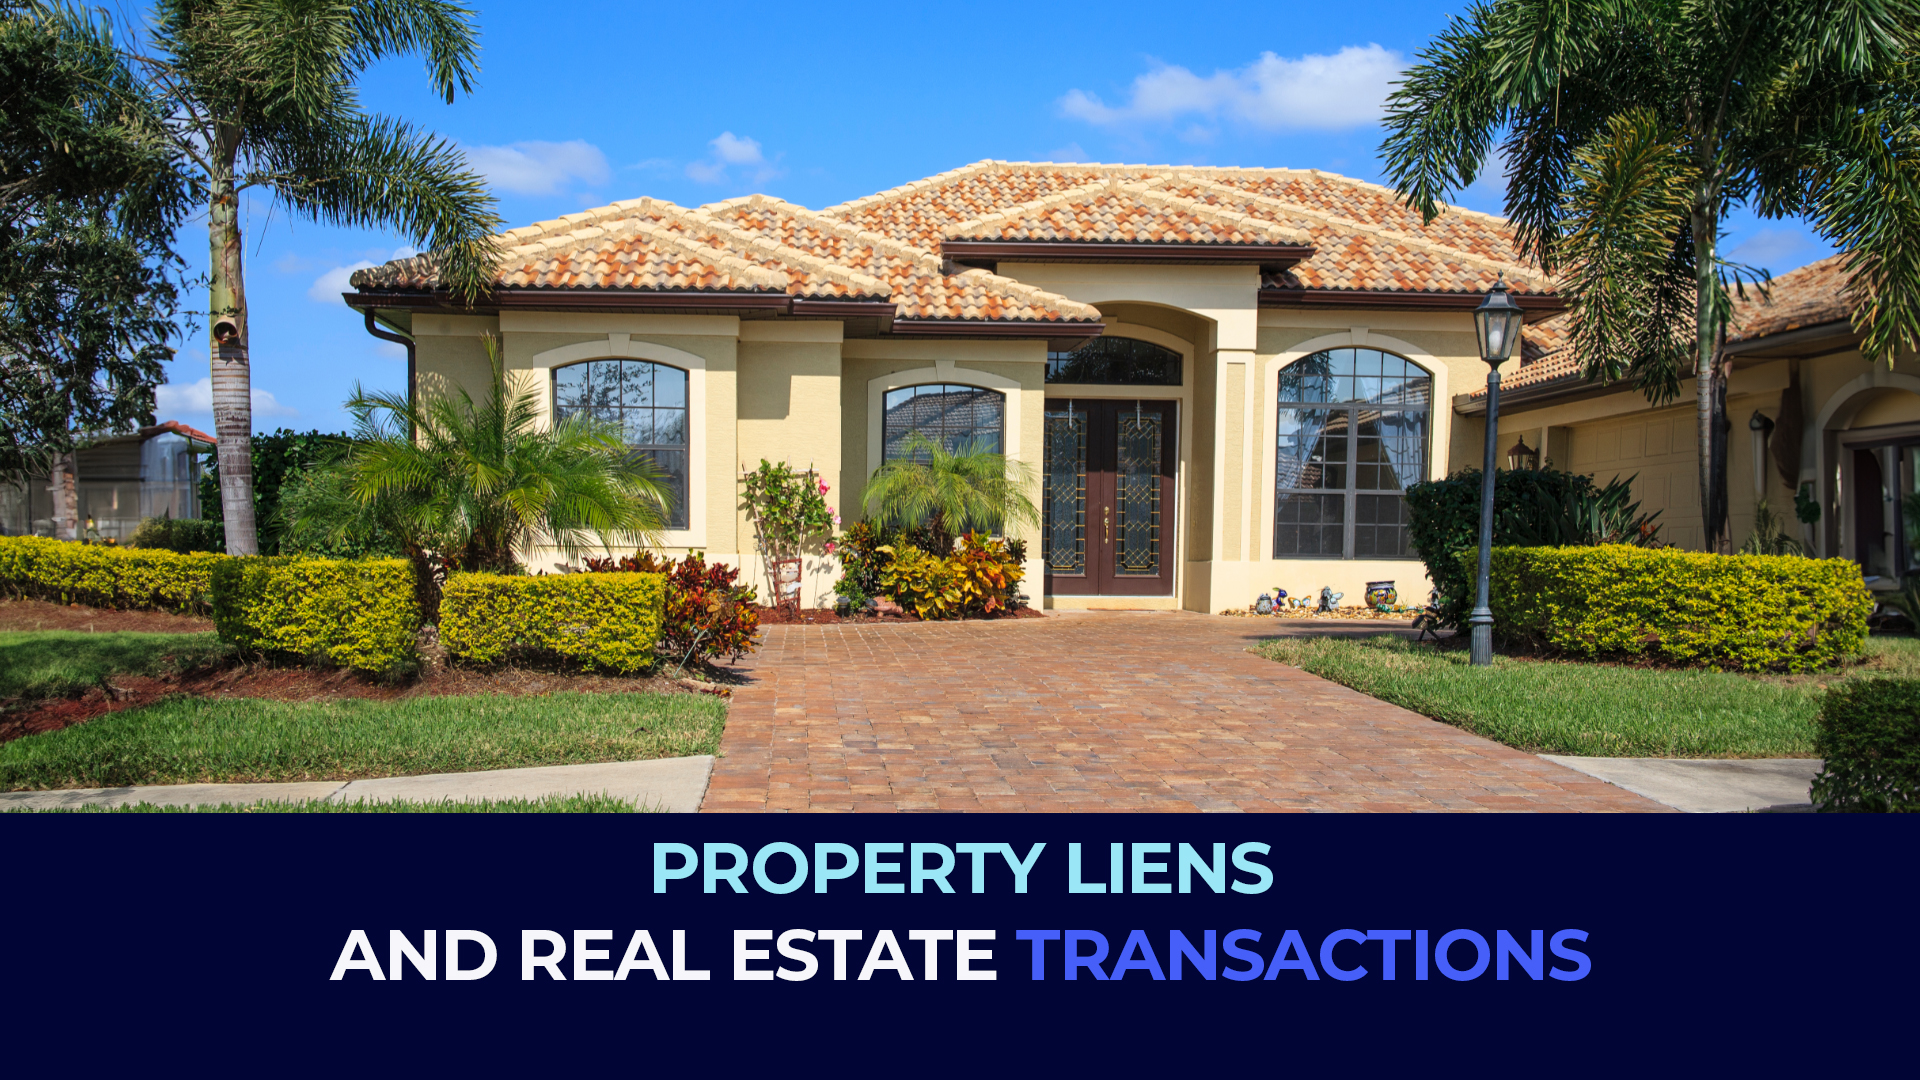 A picture of a house on a sunny day with the title "PROPERTY LIENS AND REAL ESTATE TRANSACTIONS"